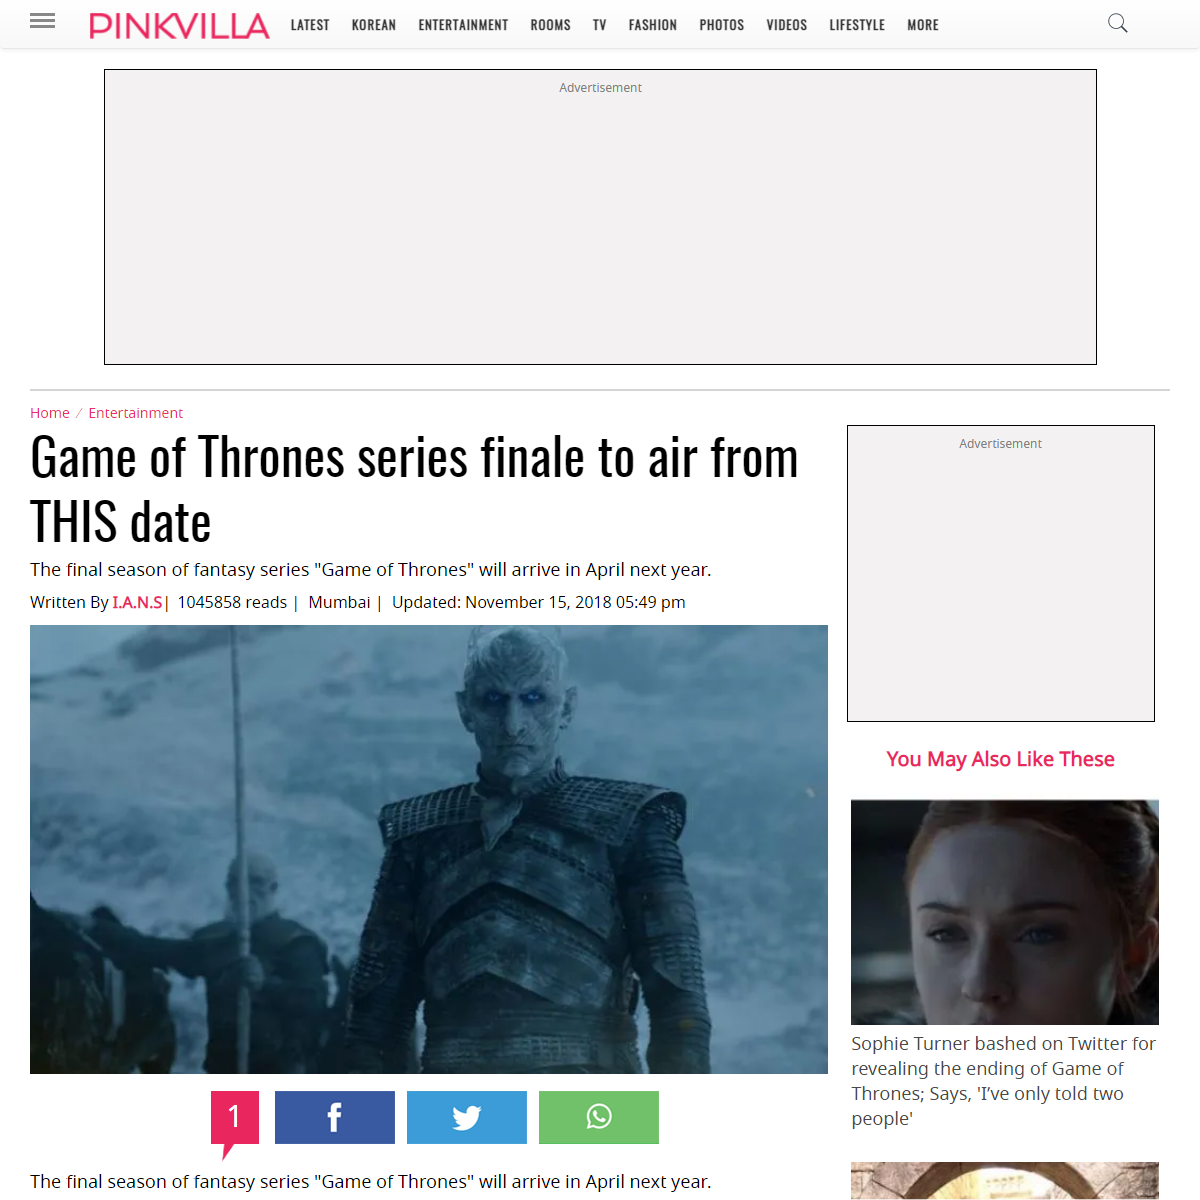 A complete backup of https://www.pinkvilla.com/entertainment/news/game-thrones-series-finale-air-date-431688